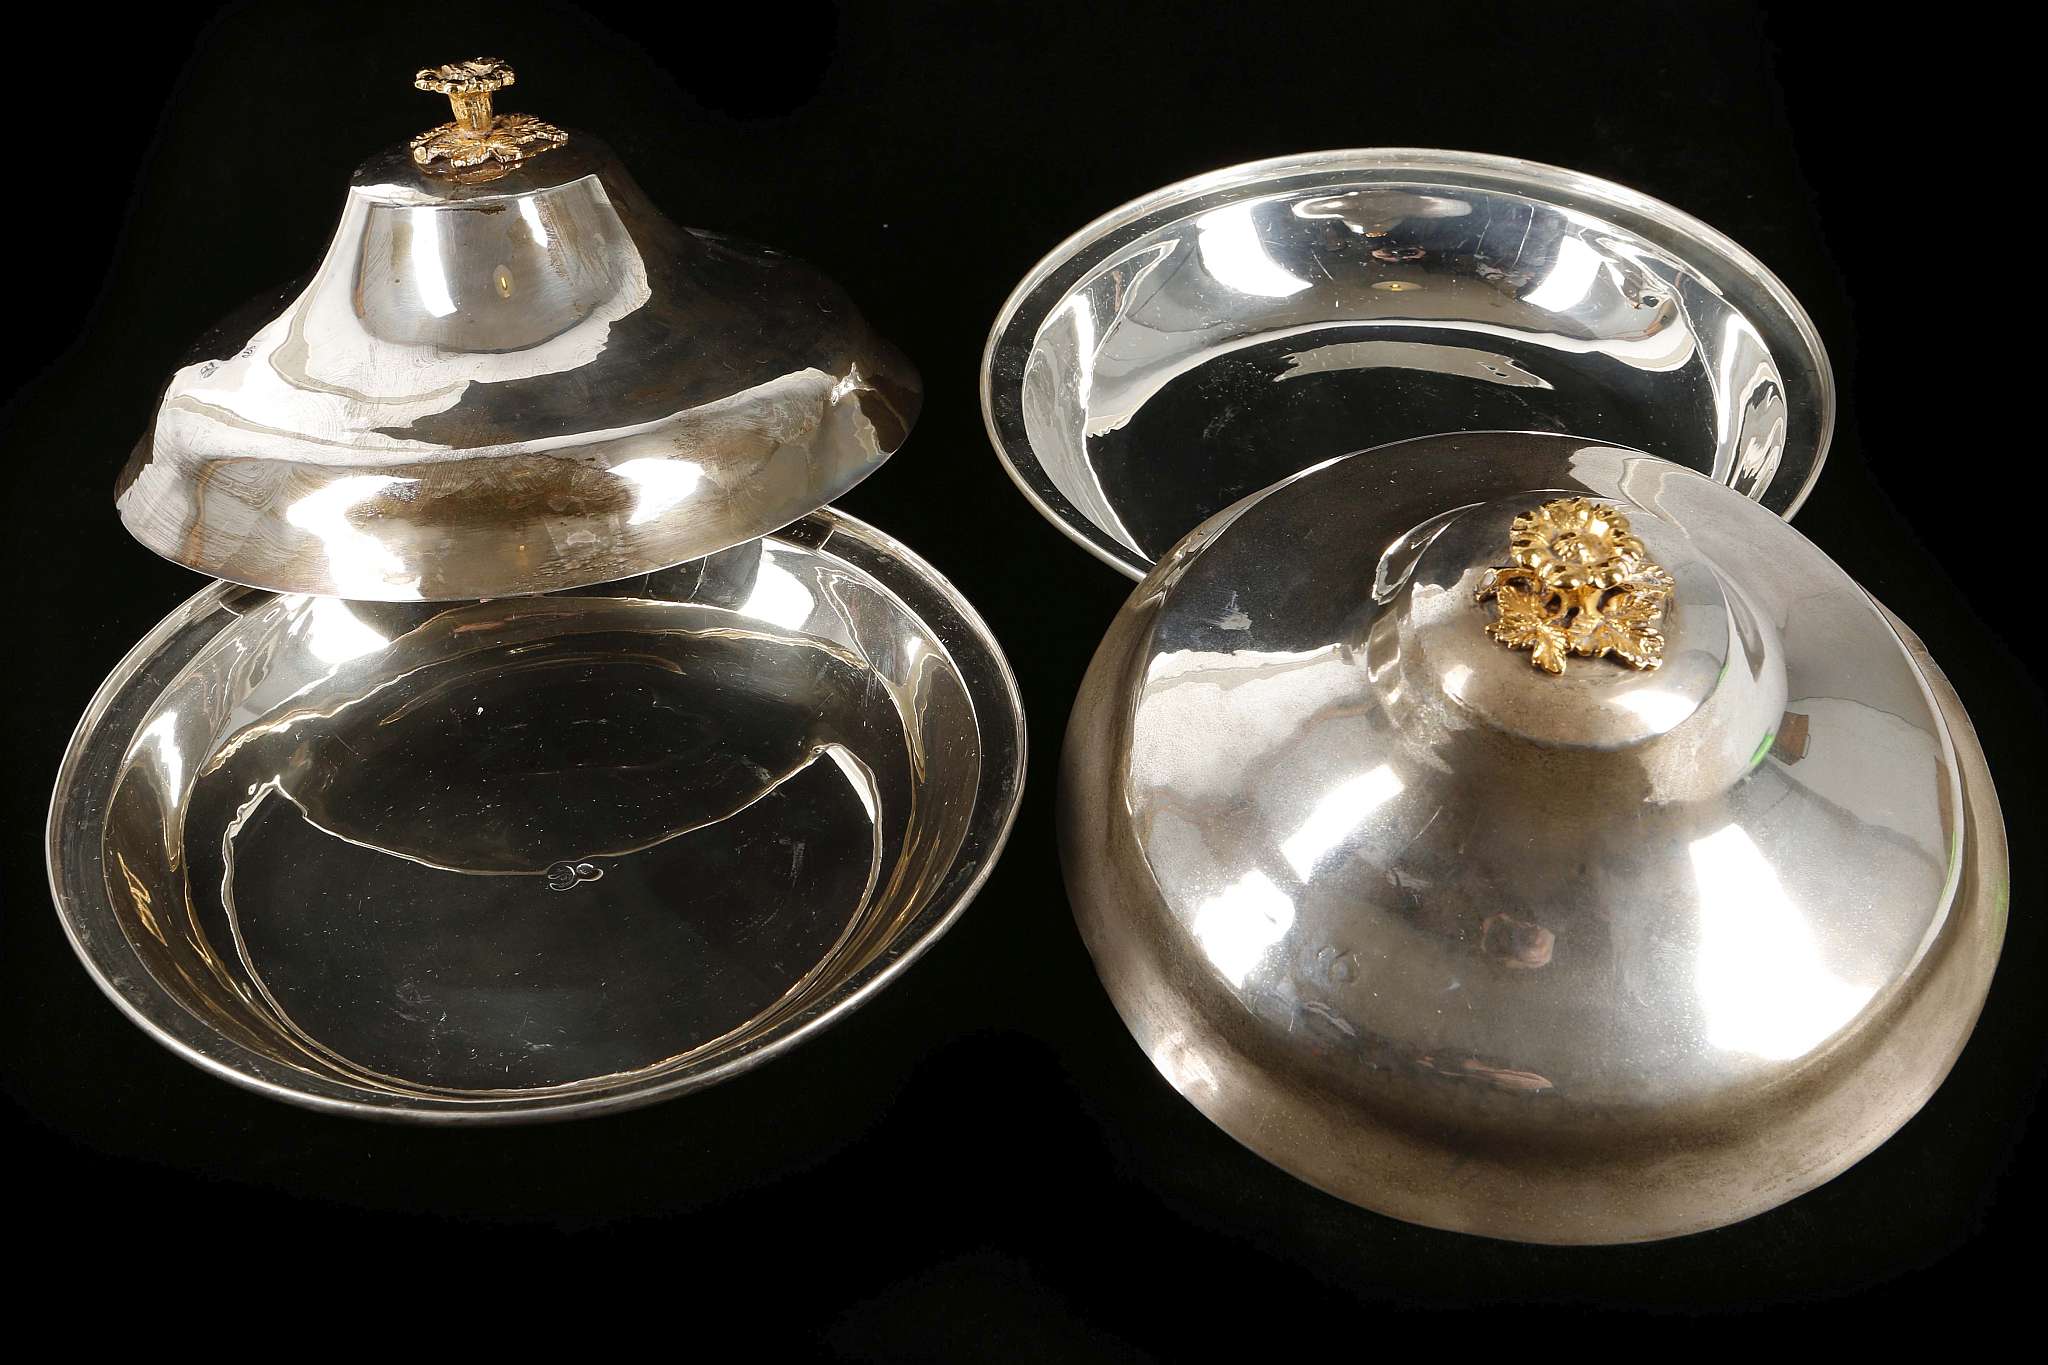 Antique silver Turkish / Ottoman entree dishes - Image 2 of 2